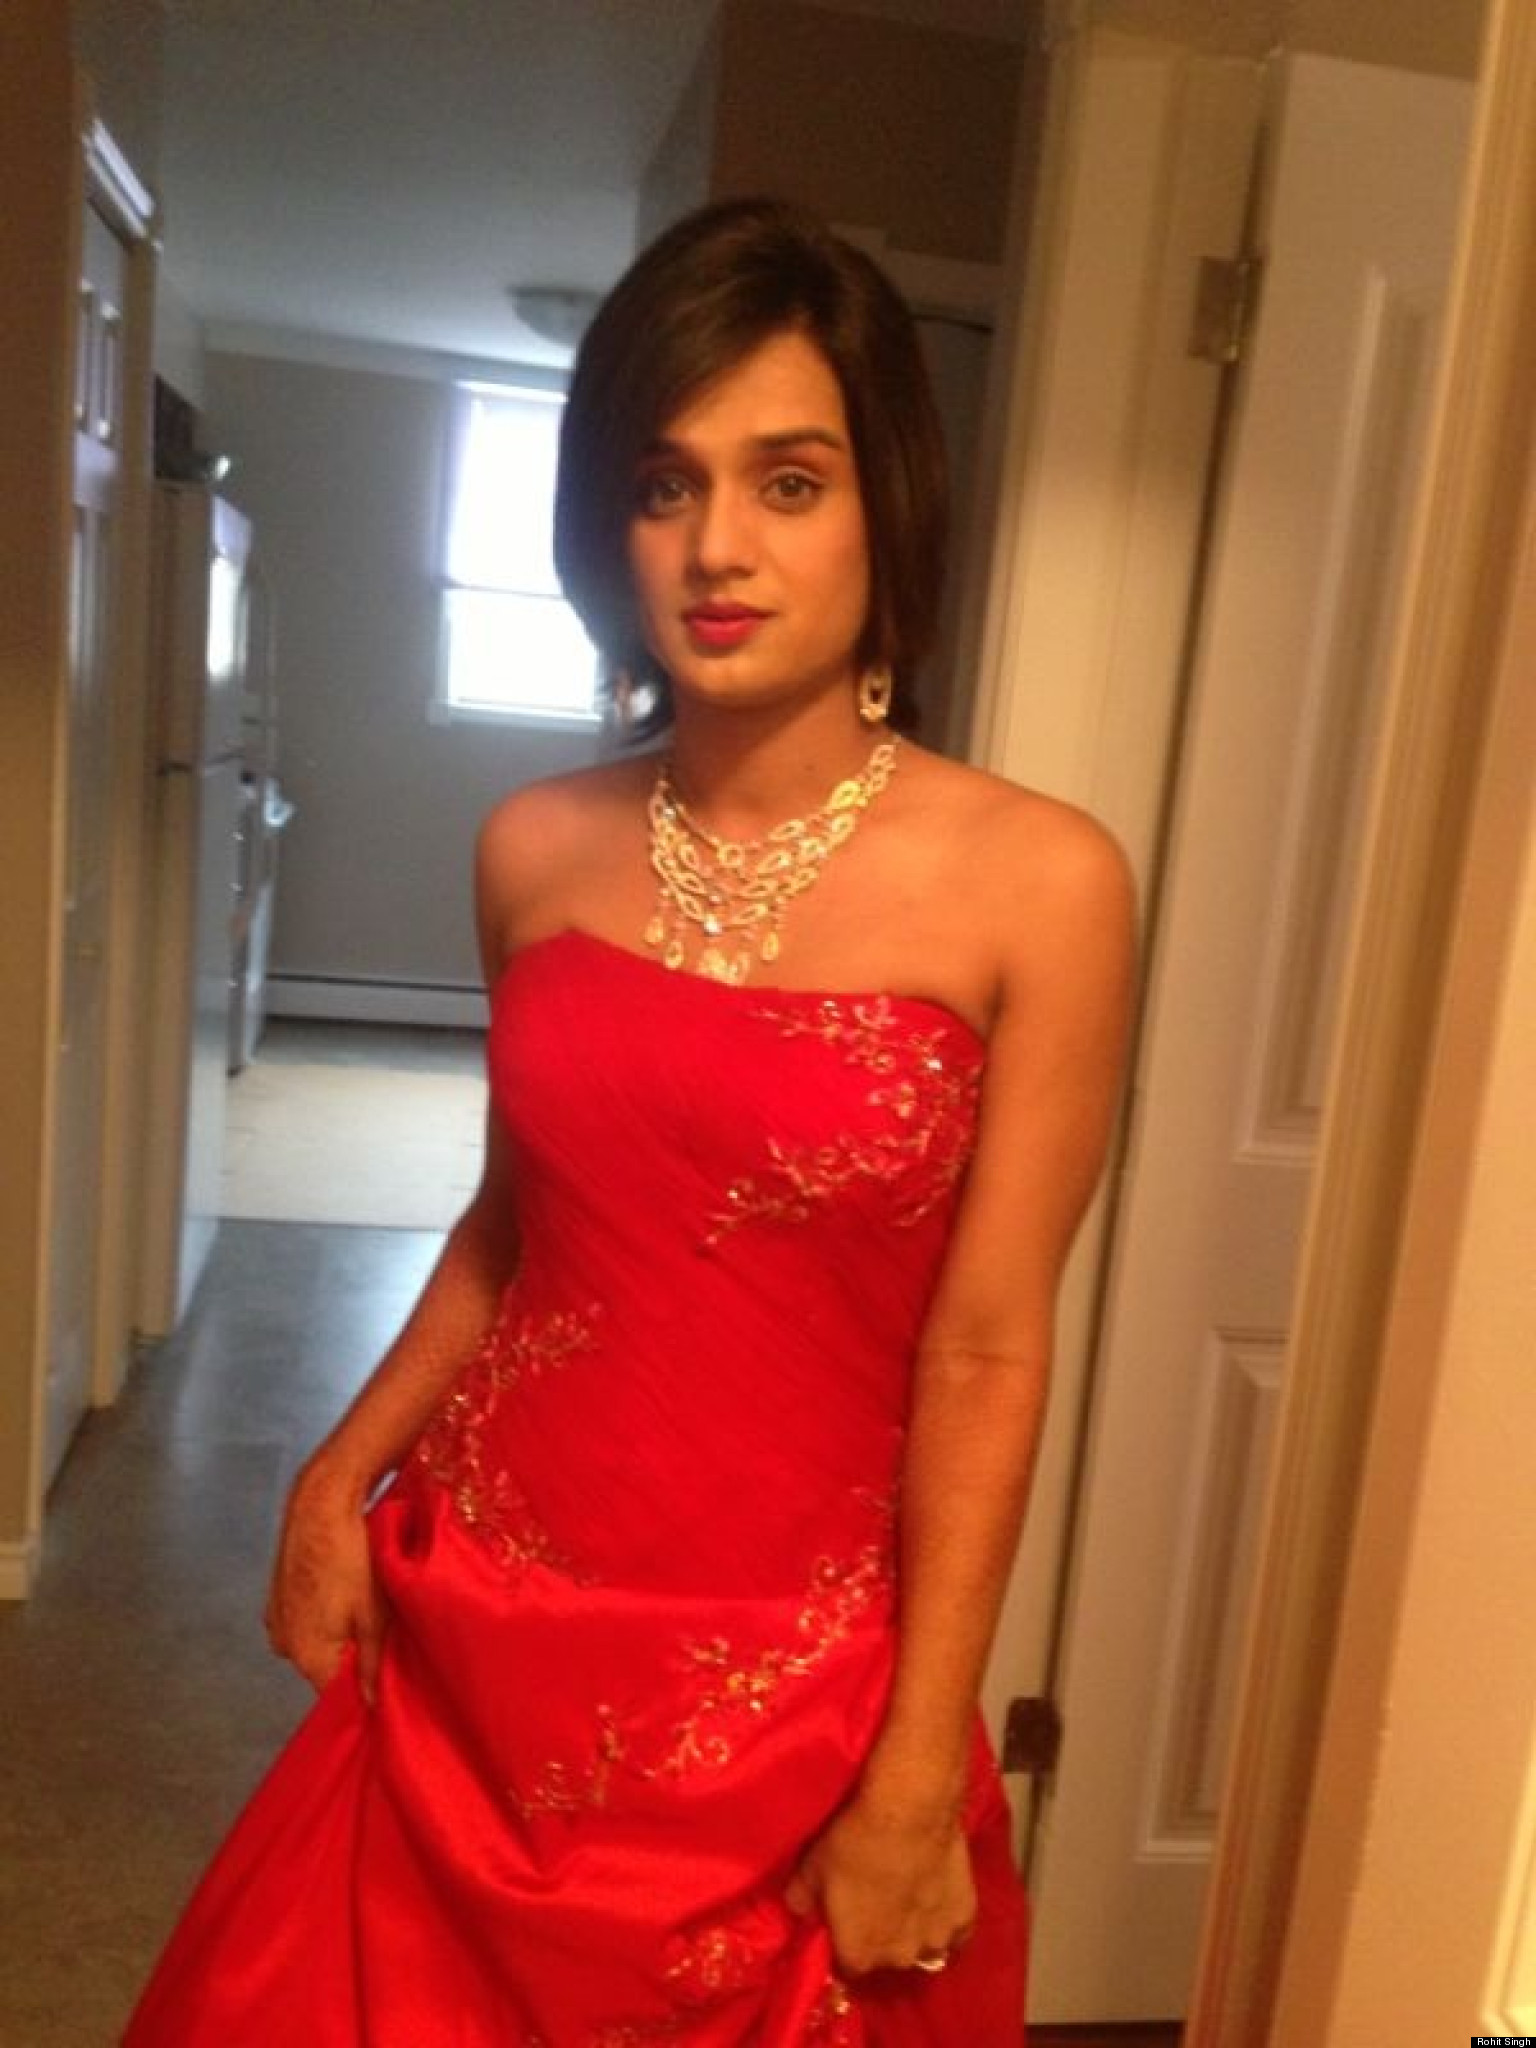 Rohit Singh Canadian Transgender Woman Allegedly Denied Service At Bridal Boutique Huffpost